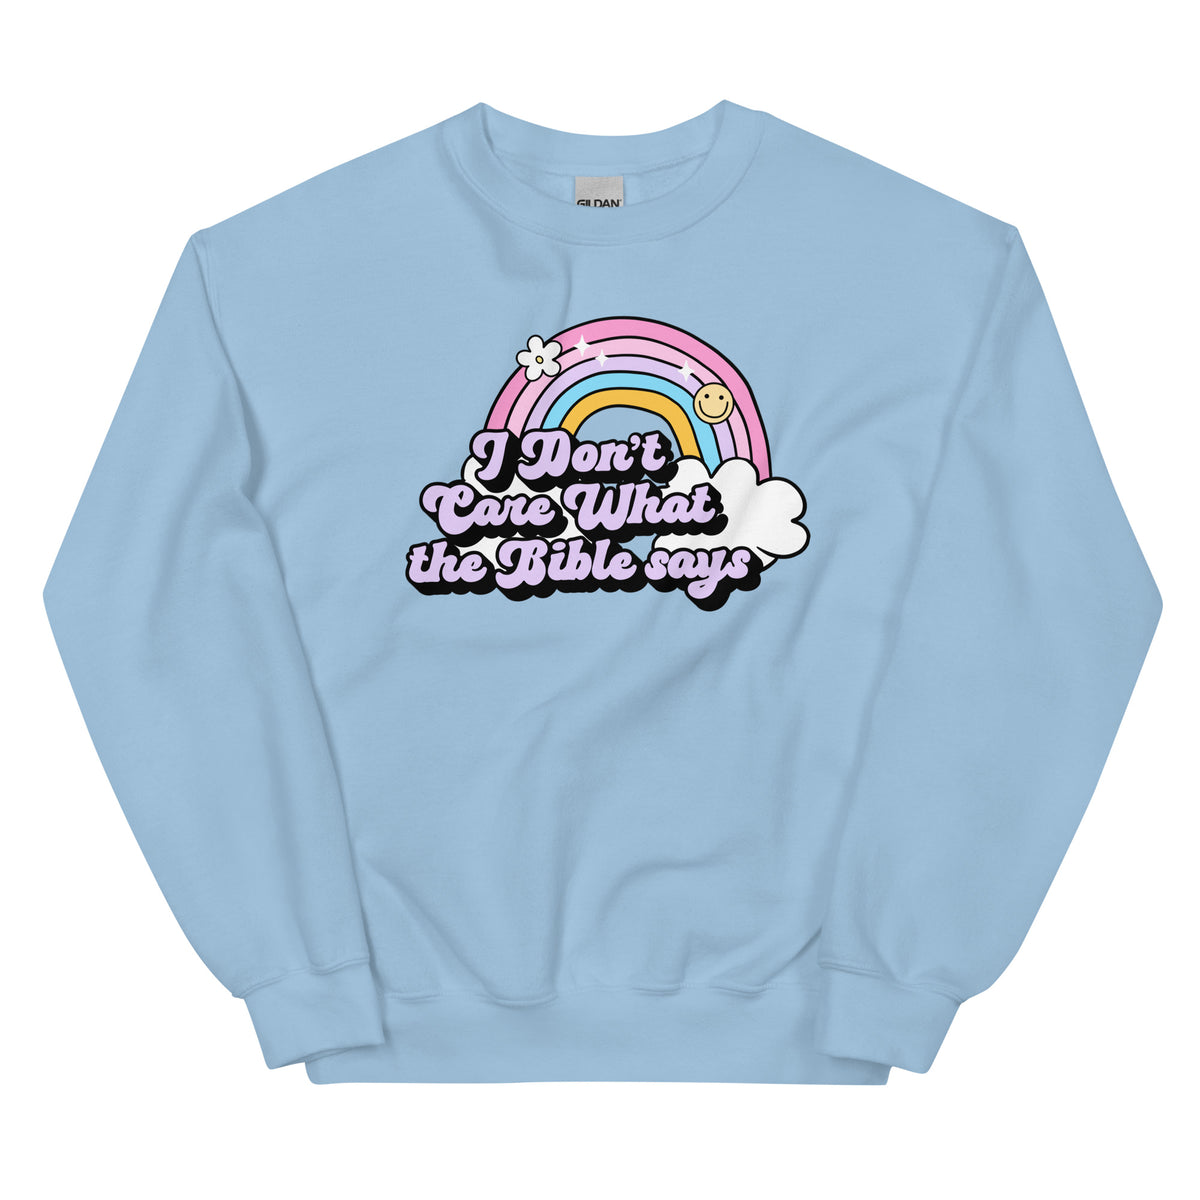 I Don't Care What the Bible Says Sweatshirt